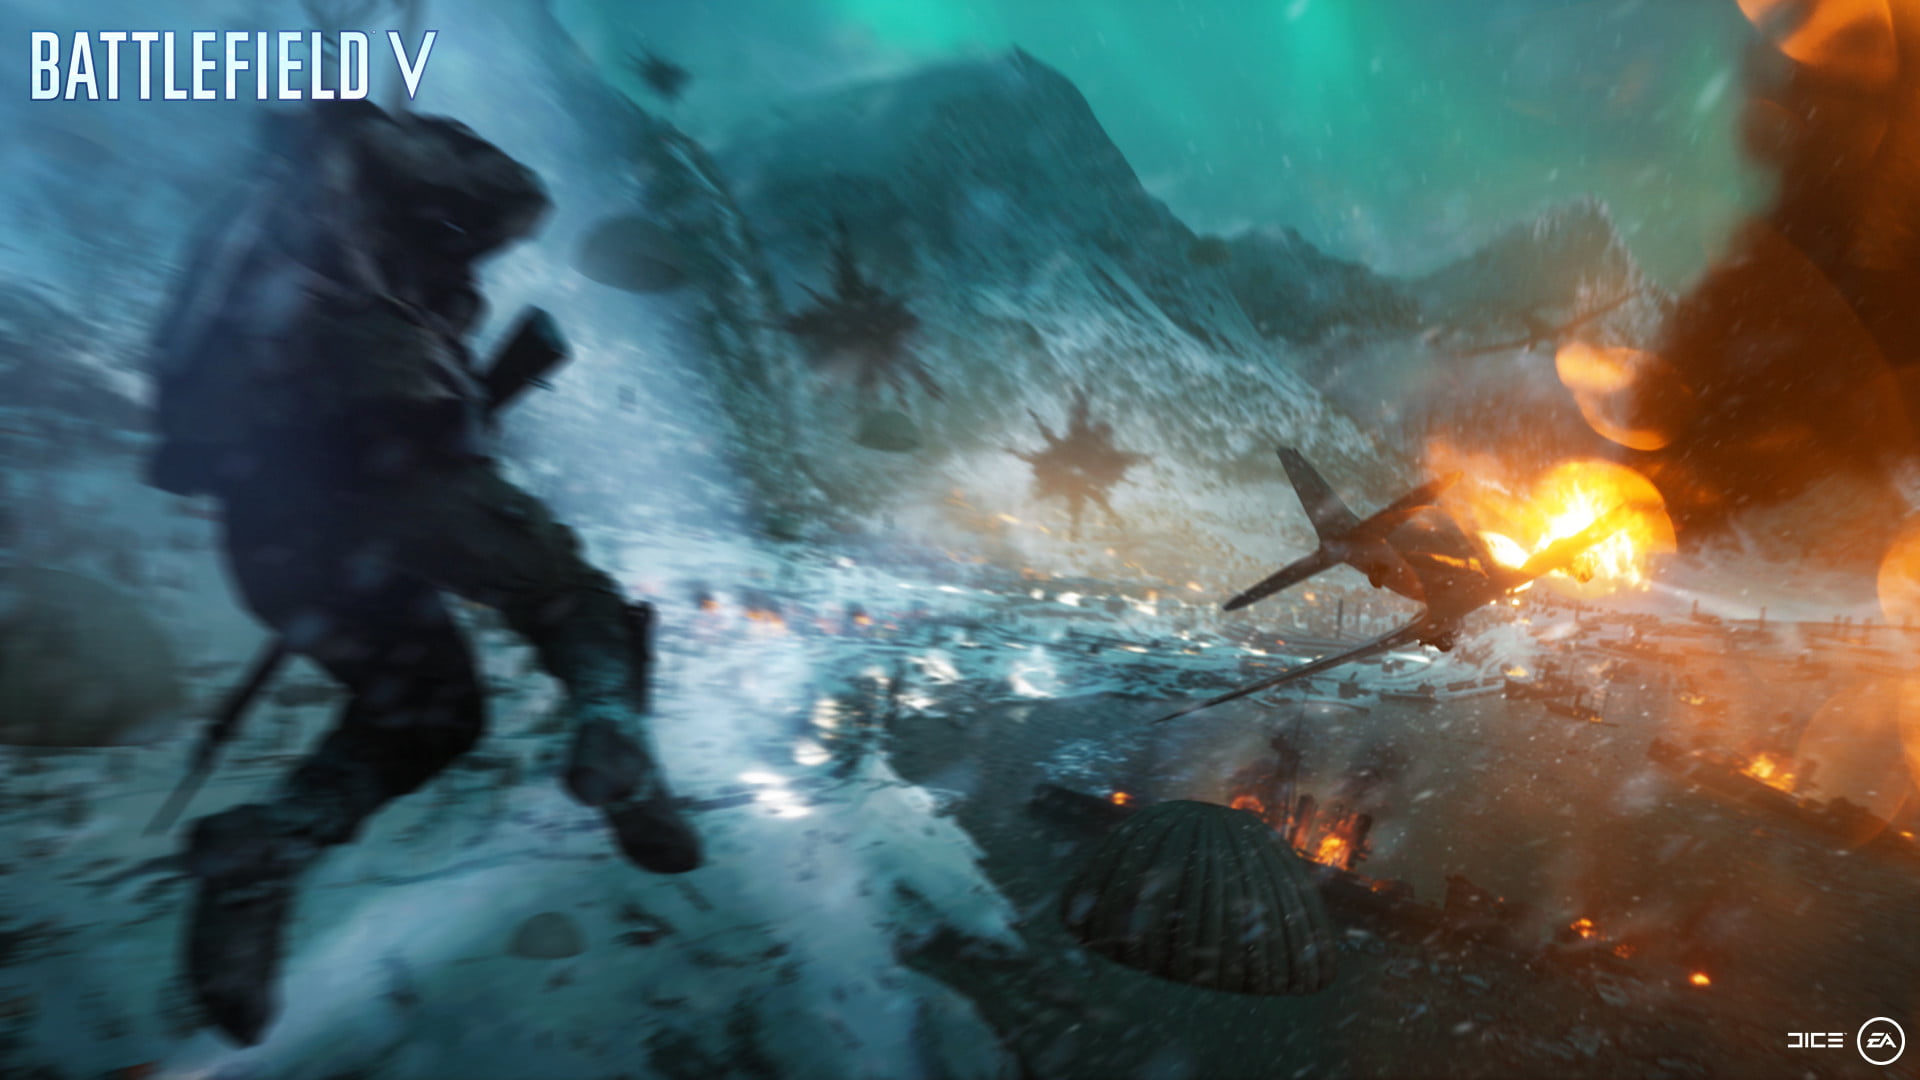 Battlefield 5 – It Will Launch With 30 Hz on Console and 60 Hz on PC